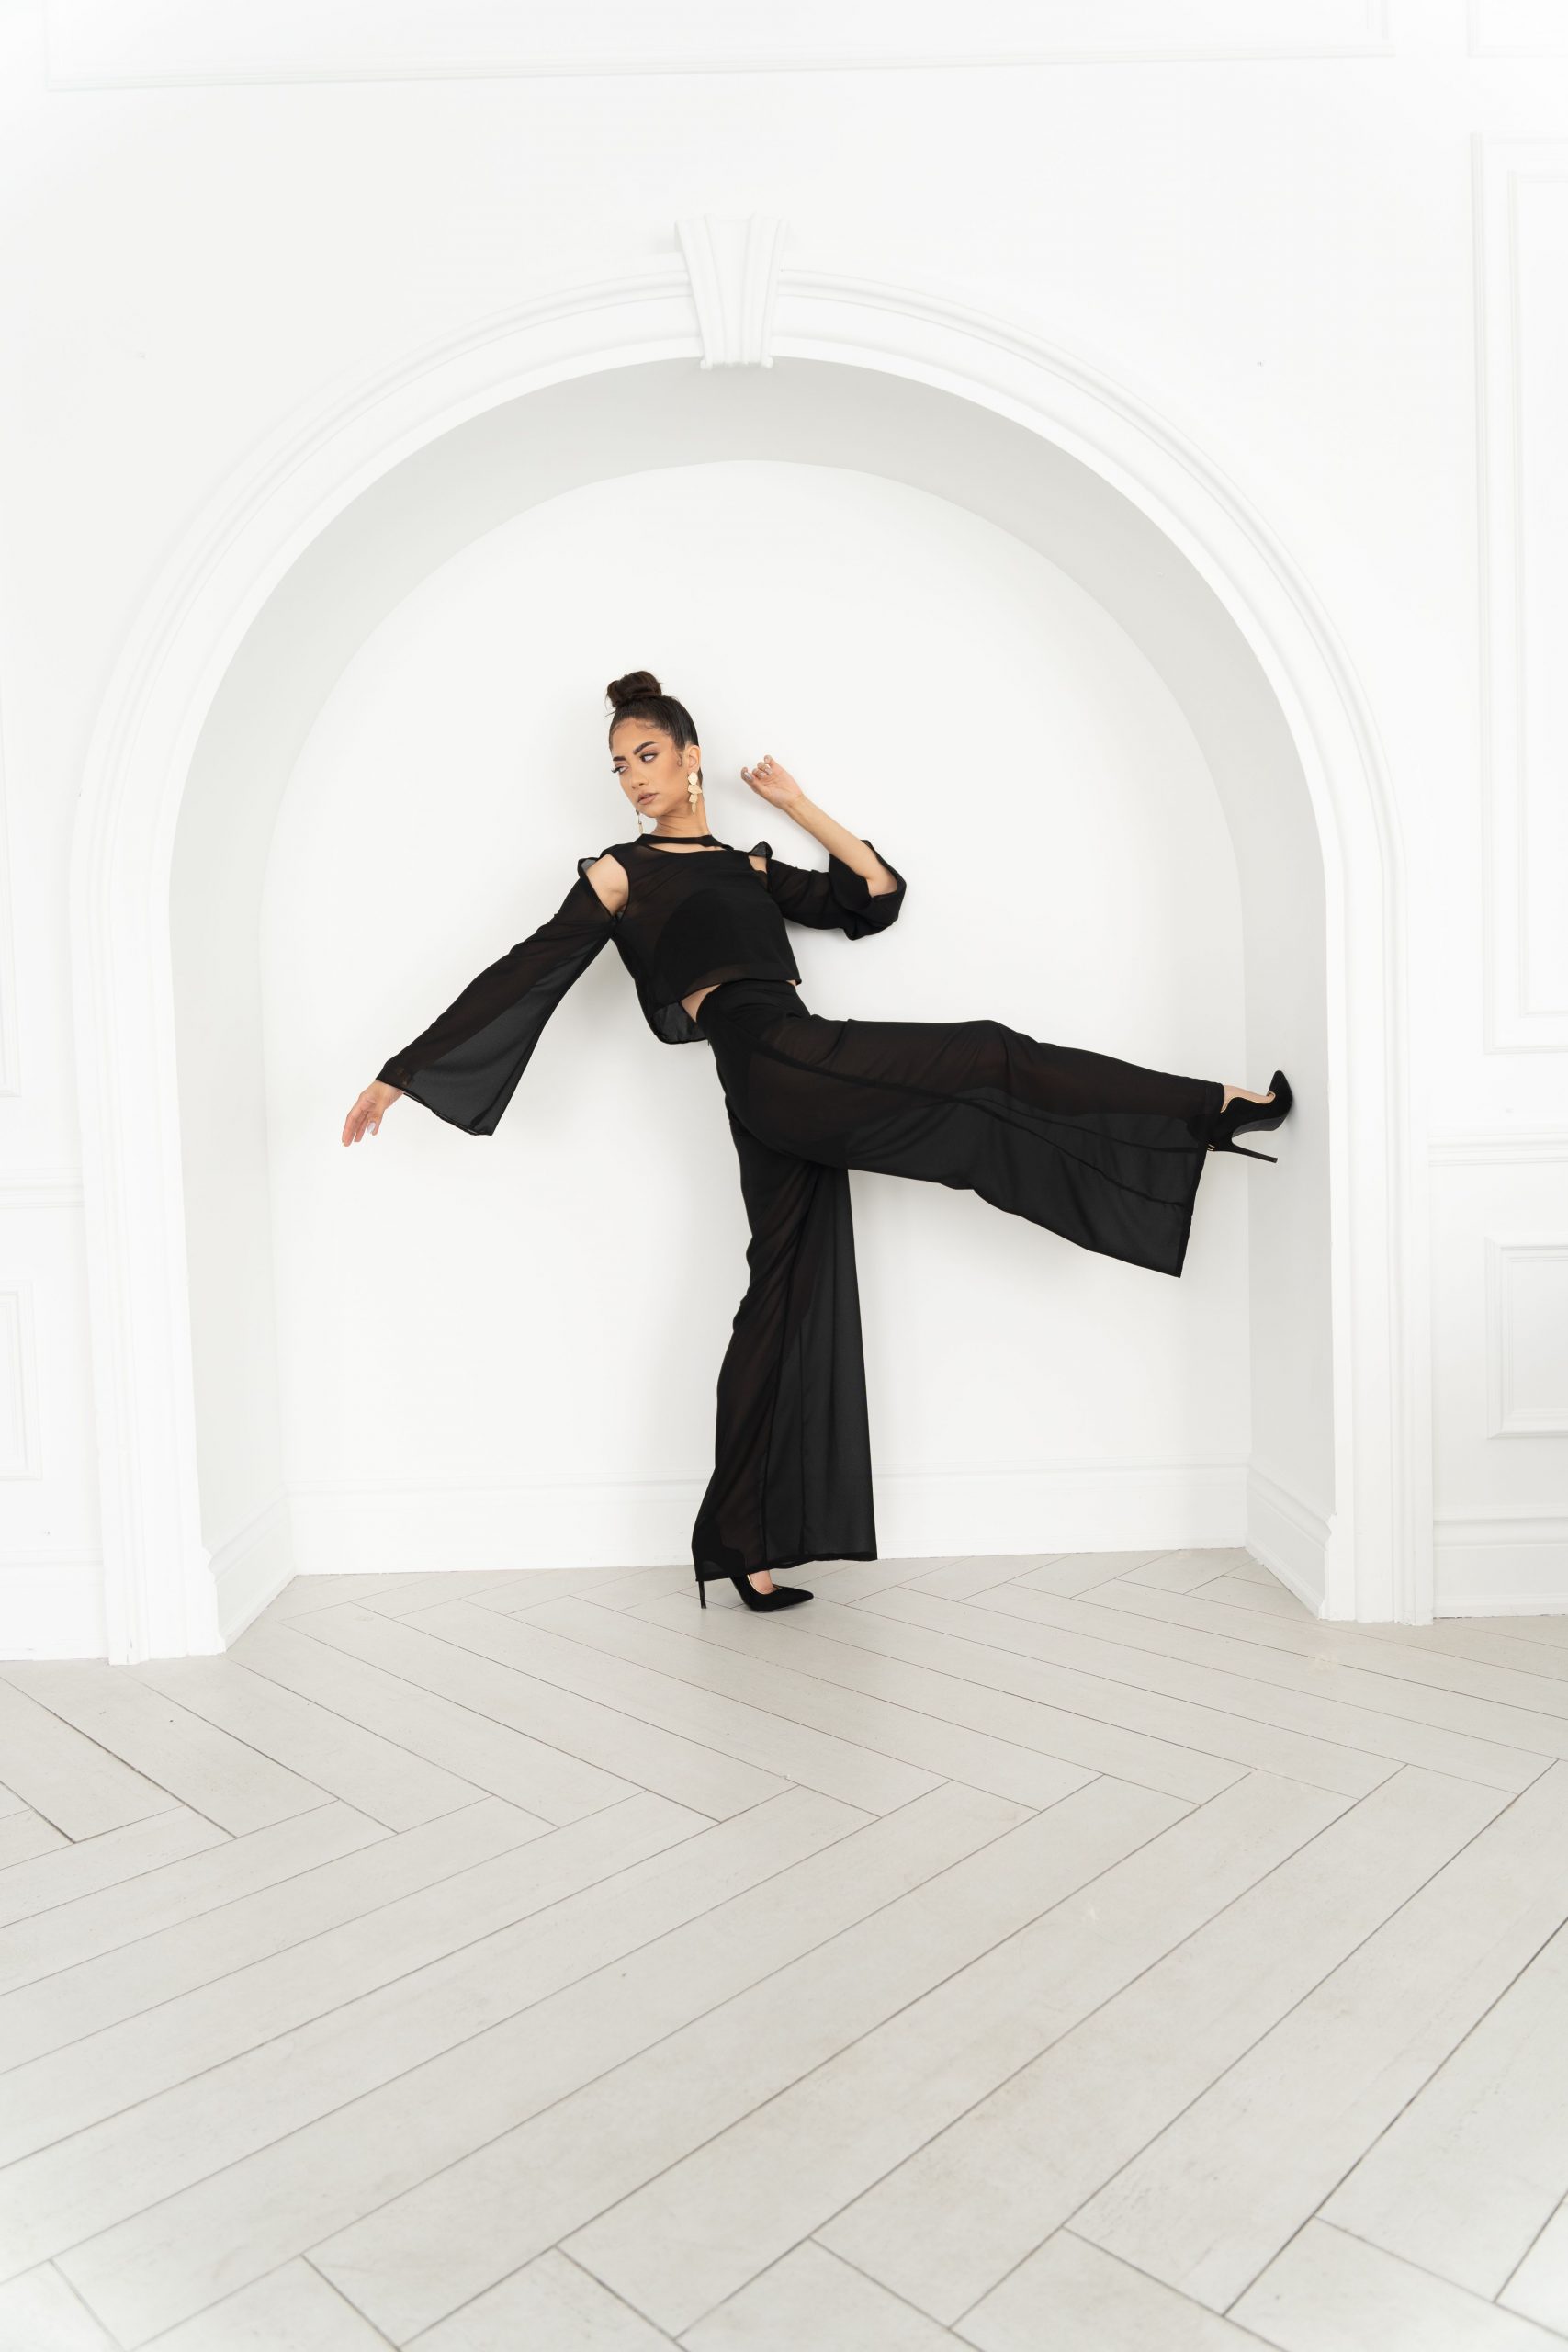 A woman in black outfit kicking around on white wall.